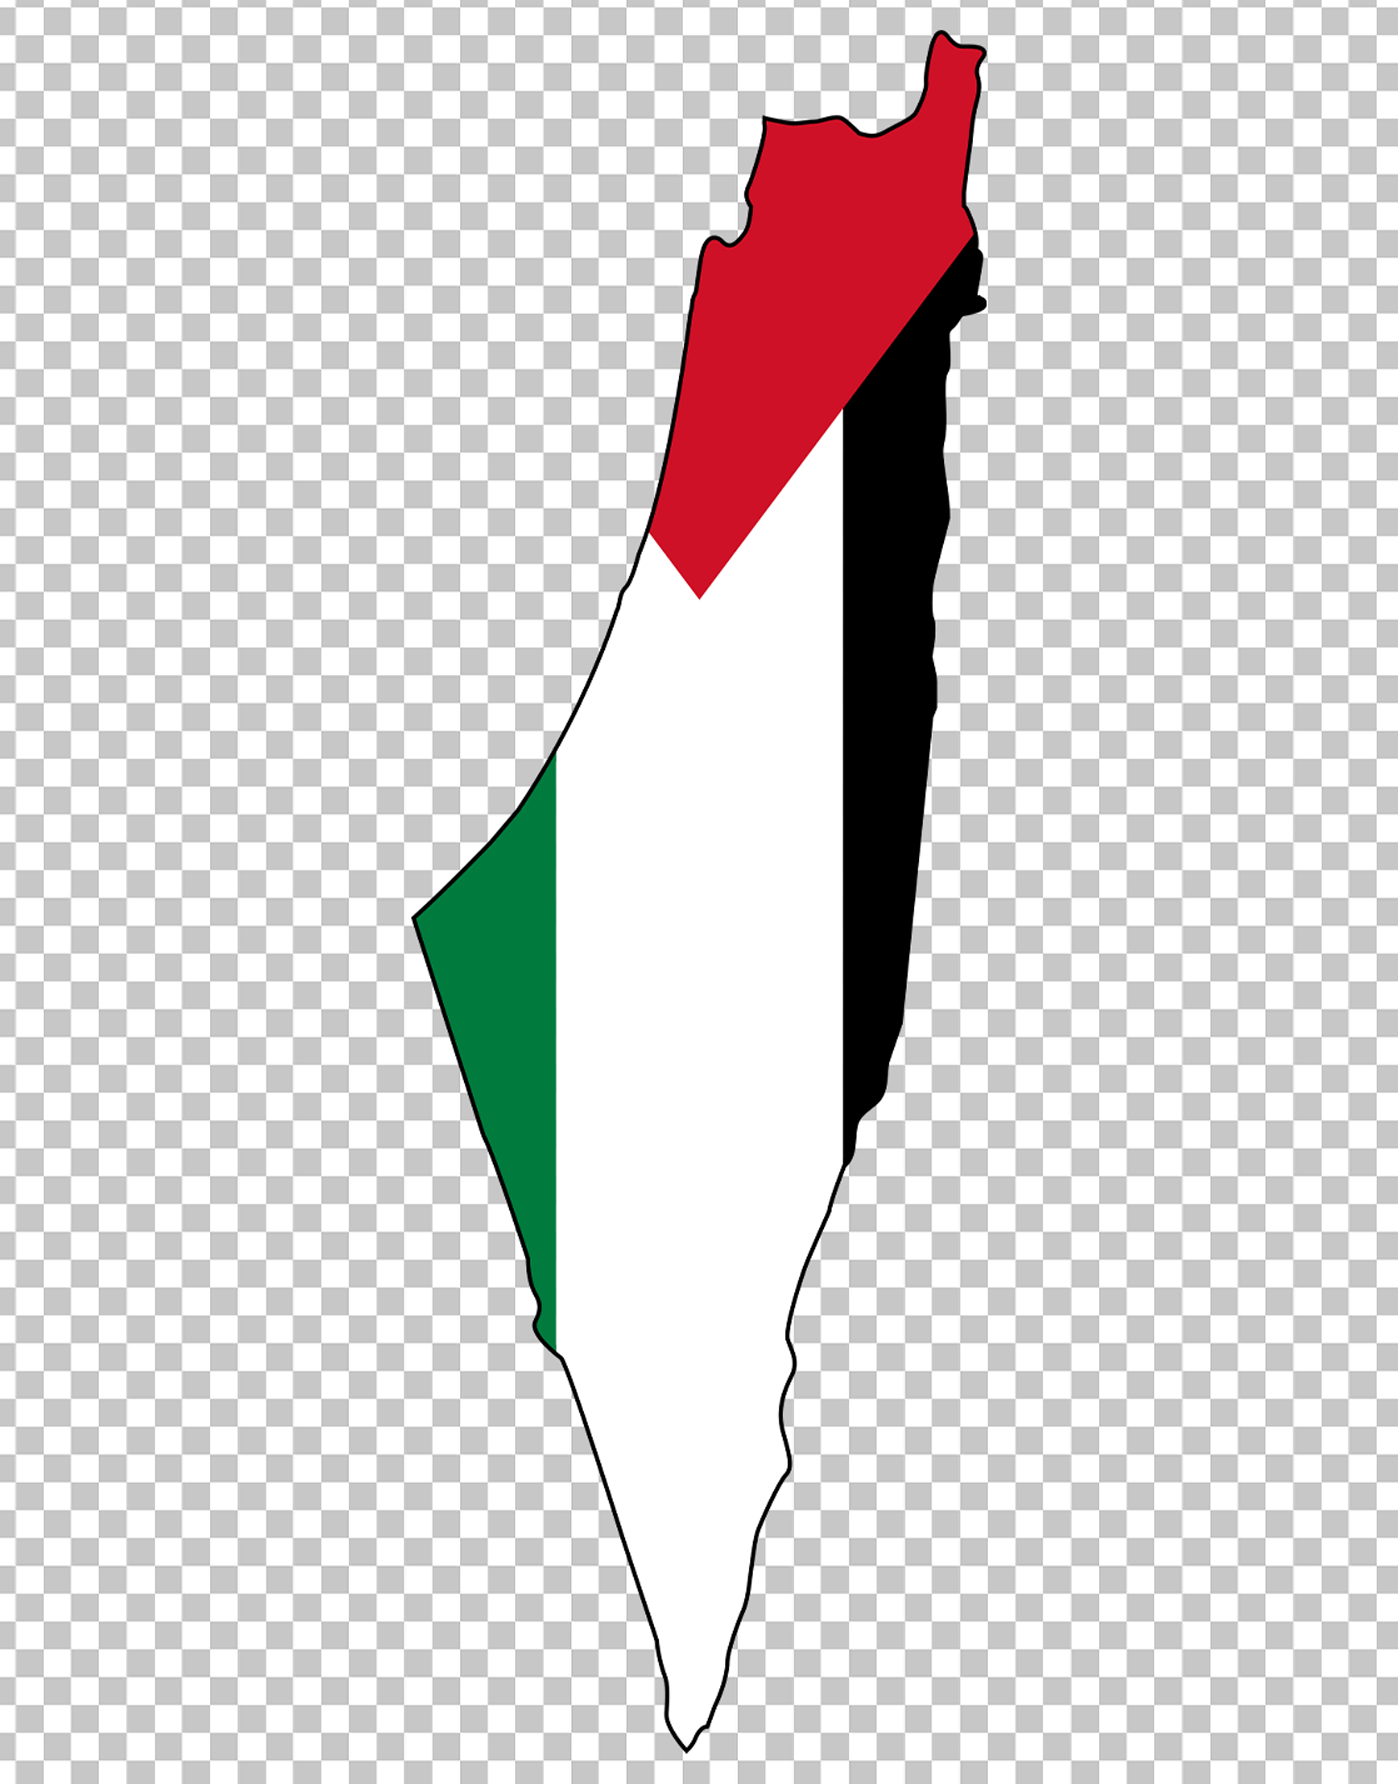 Palestinian Territories Map with Flag PNG Image